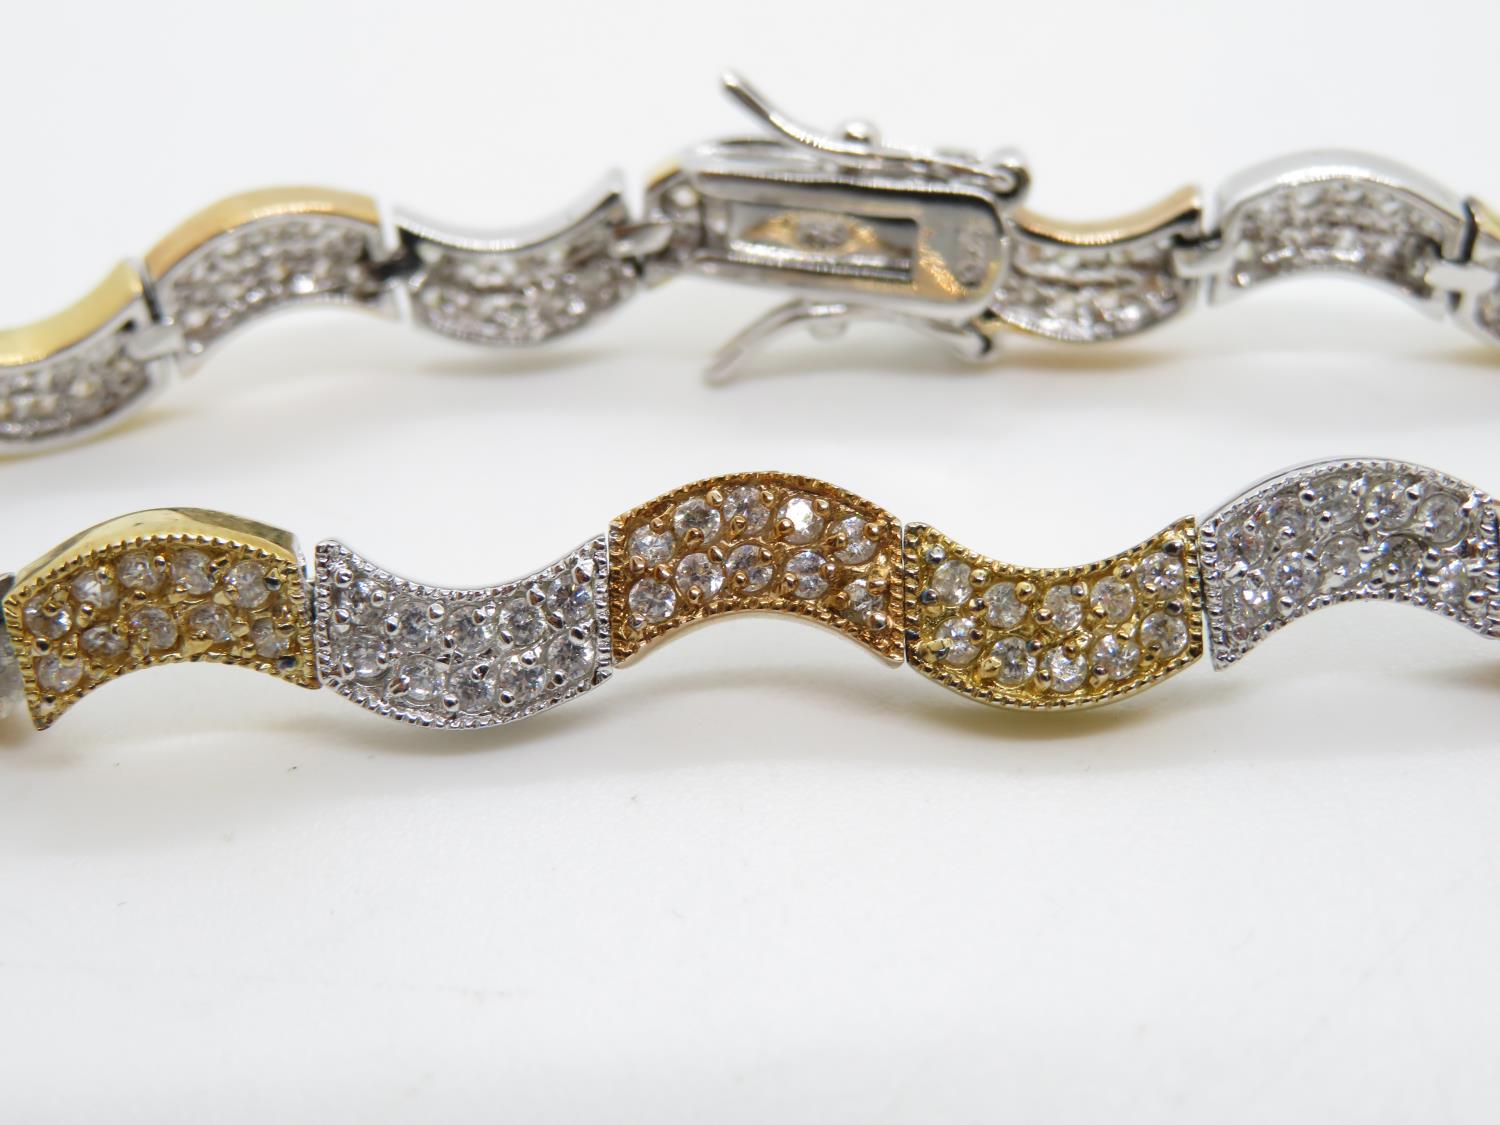 Silver wave bracelet set with CZ stones and alternate gold plated links 7.25" 14.5g - Image 2 of 3